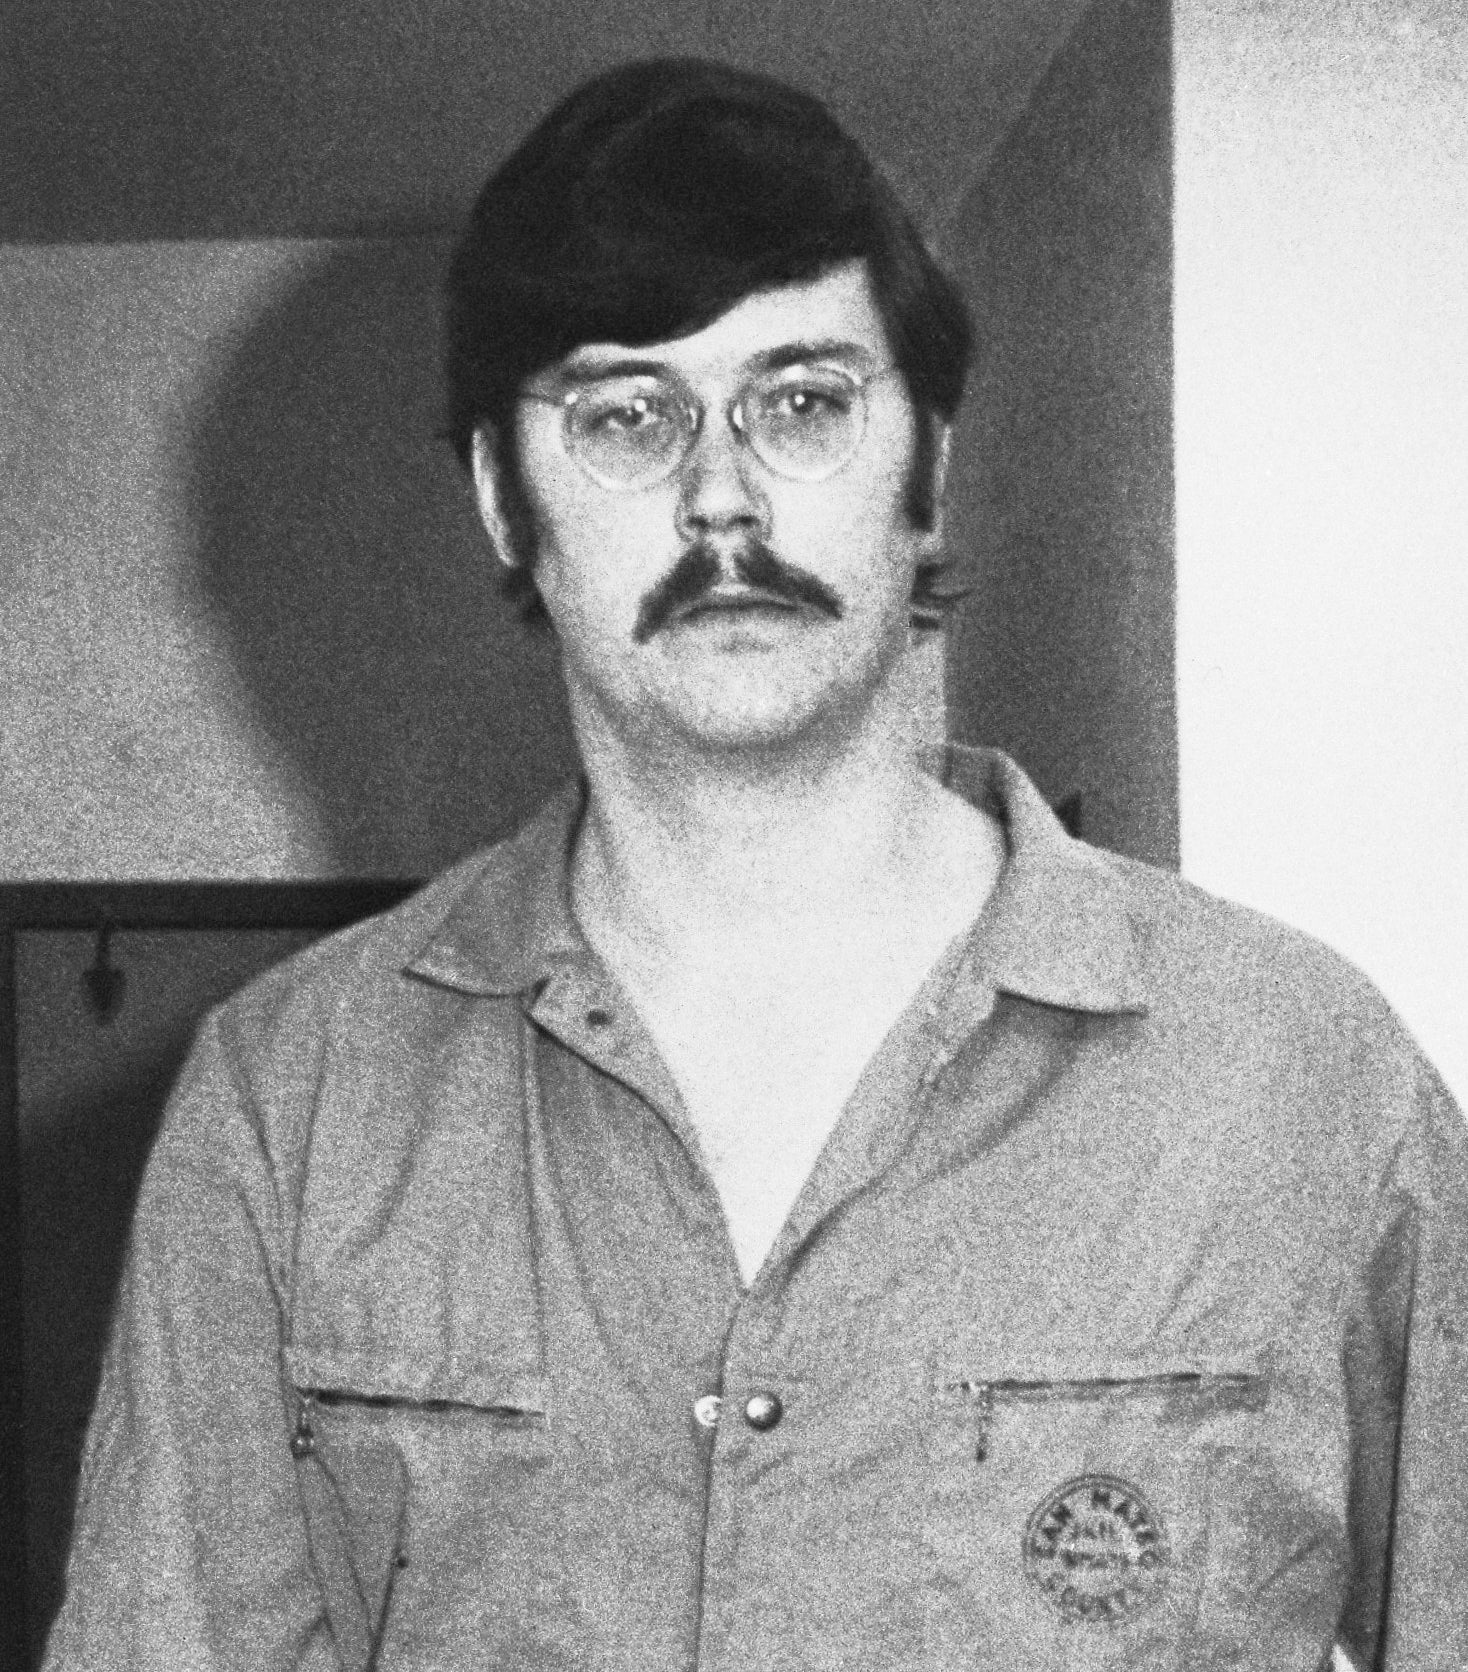 Edmund in his prison uniform with a mustache and glasses